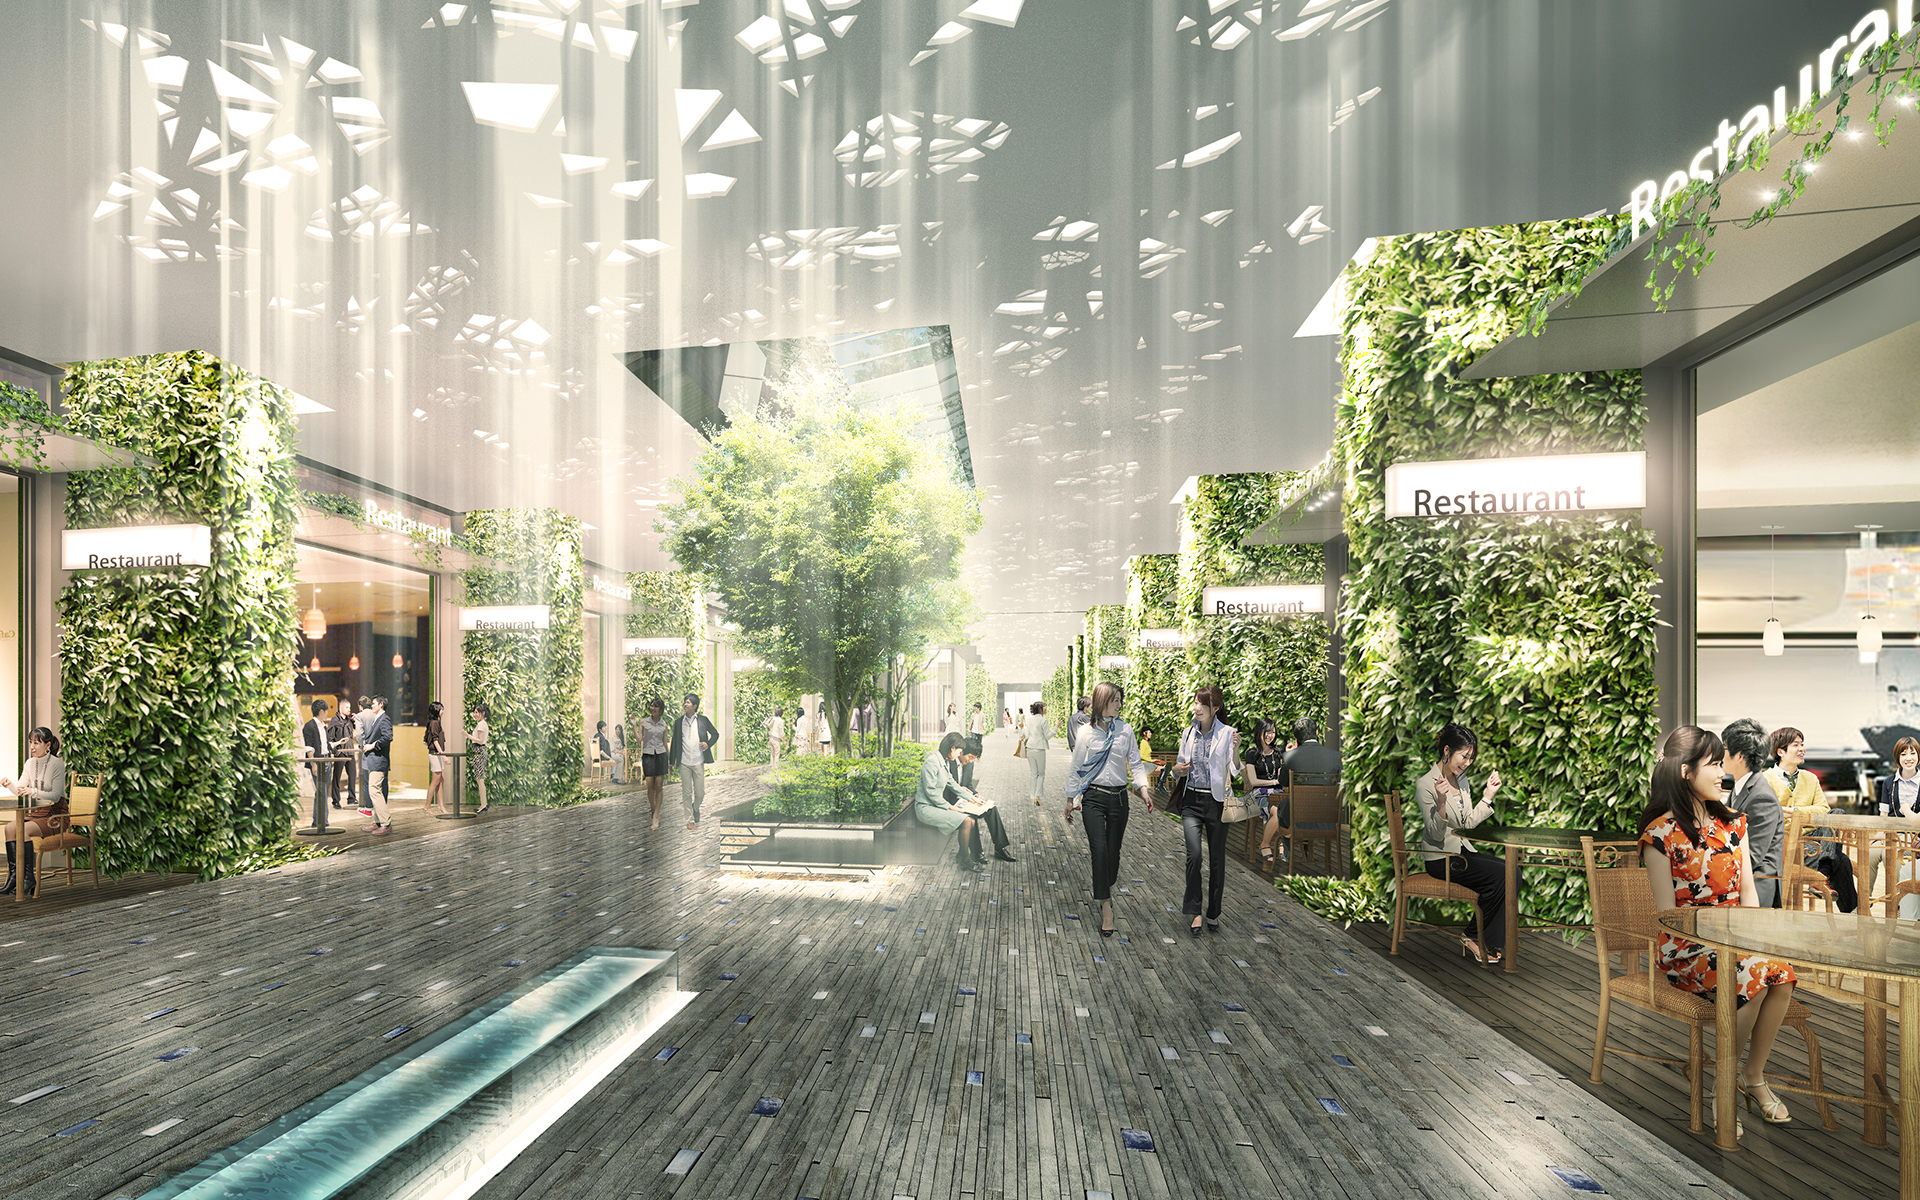 CG rendering of the completed commercial zone